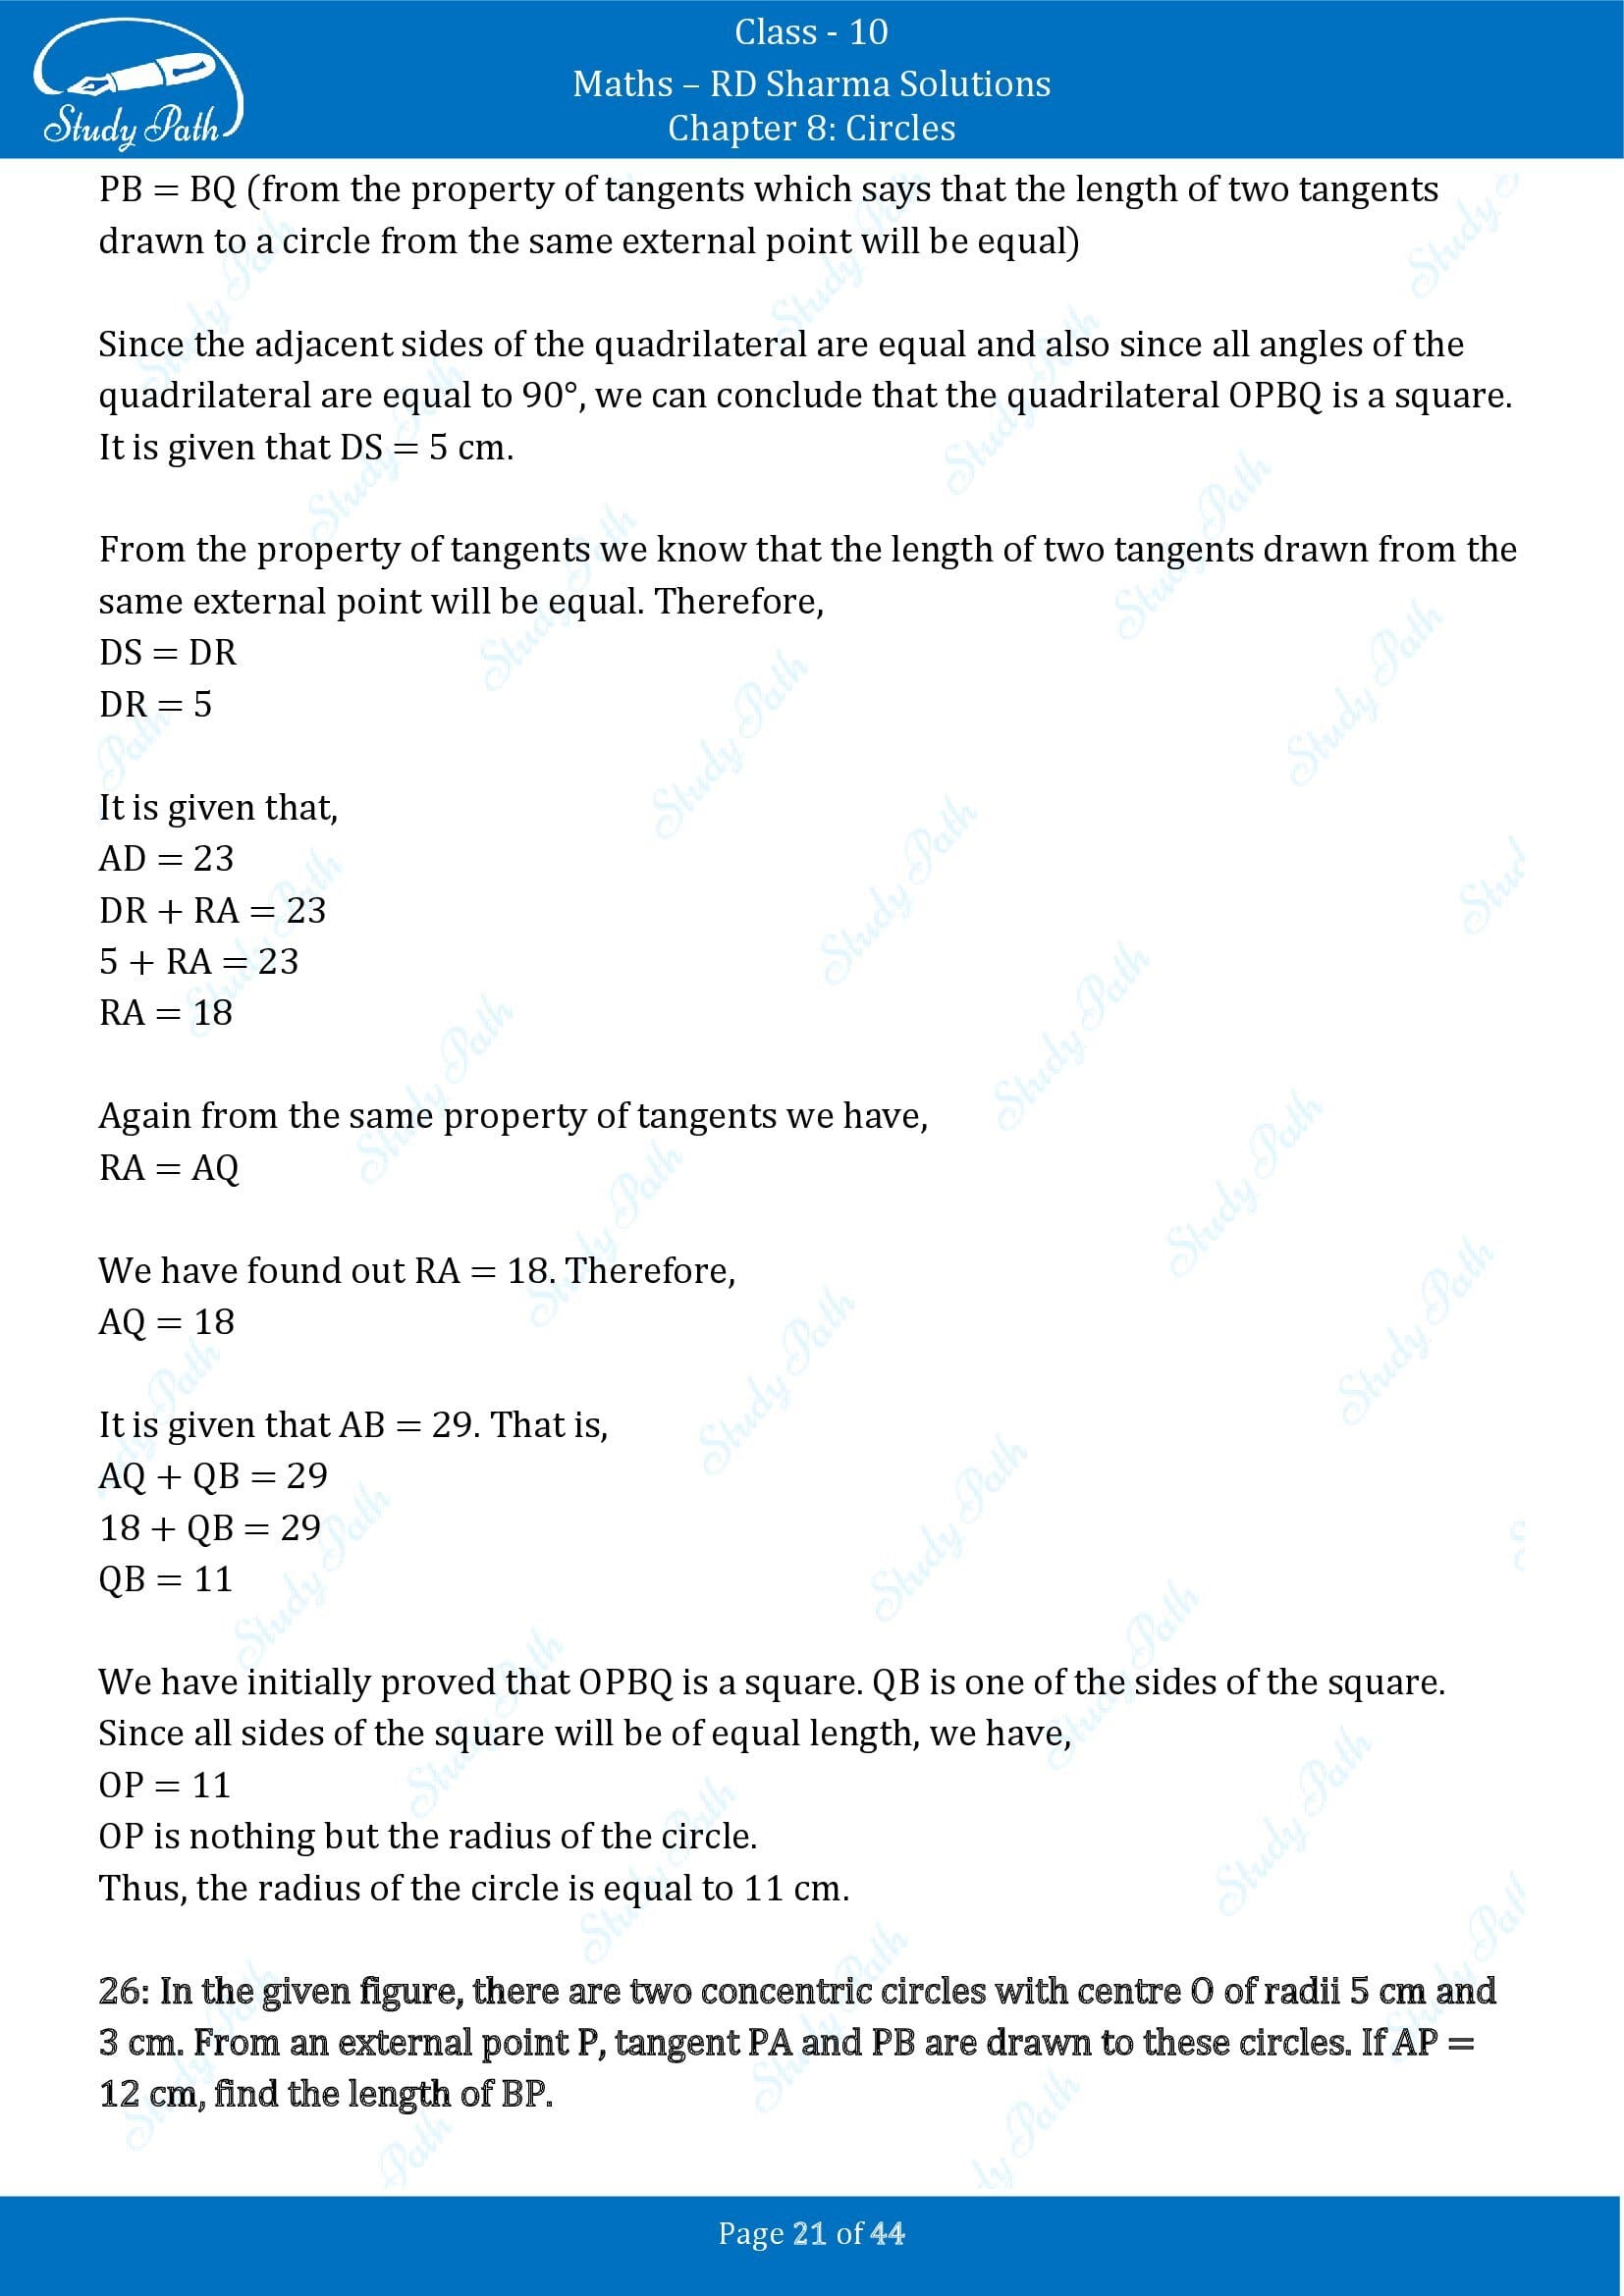 RD Sharma Solutions Class 10 Chapter 8 Circles Exercise 8.2 00021